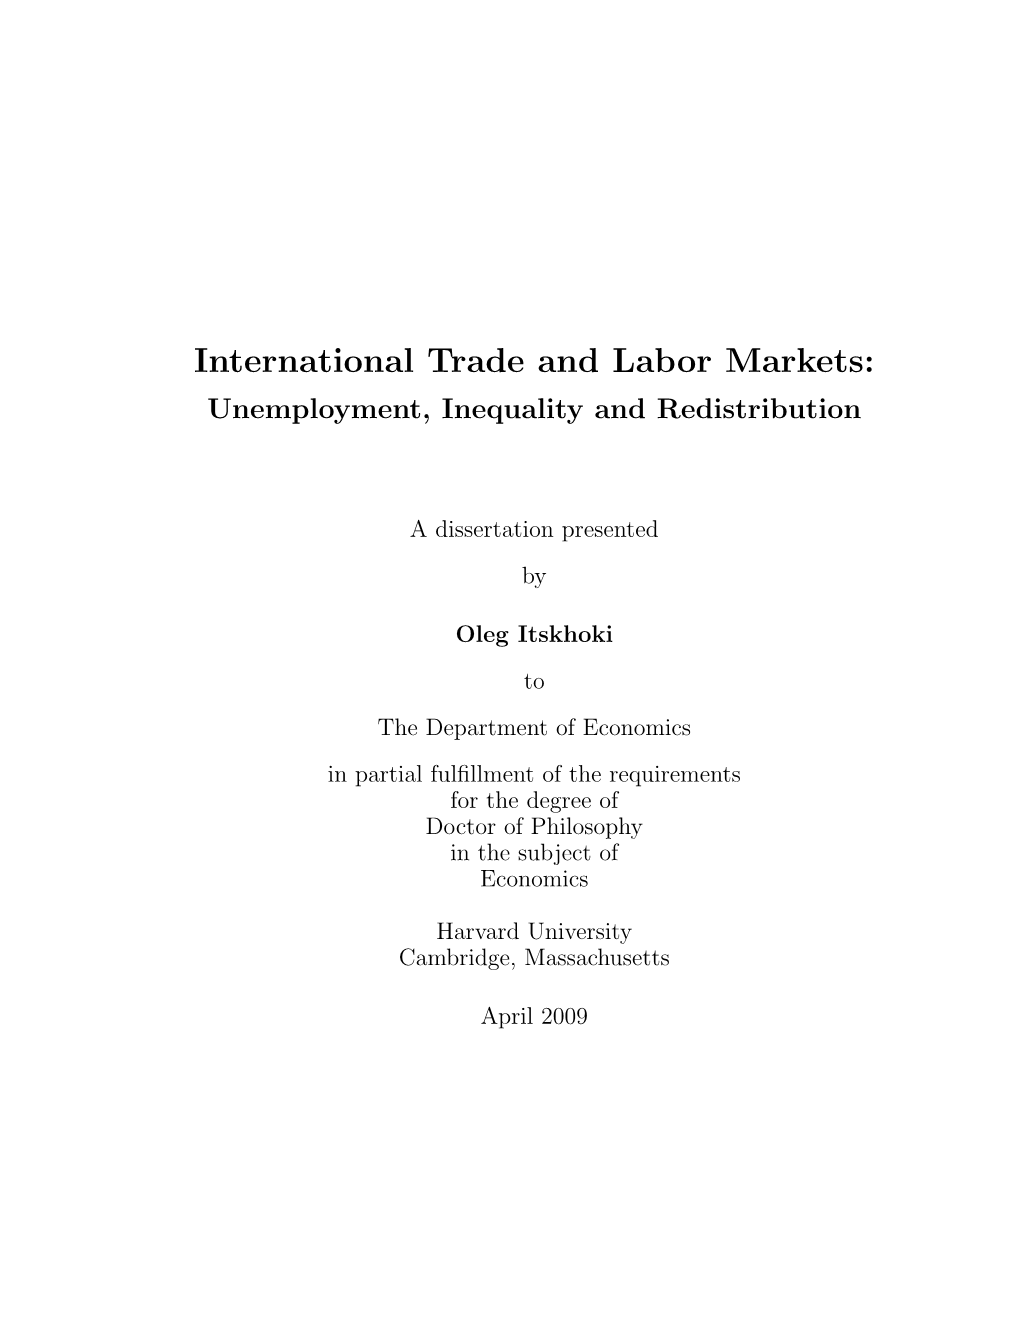 International Trade and Labor Markets: Unemployment, Inequality and Redistribution